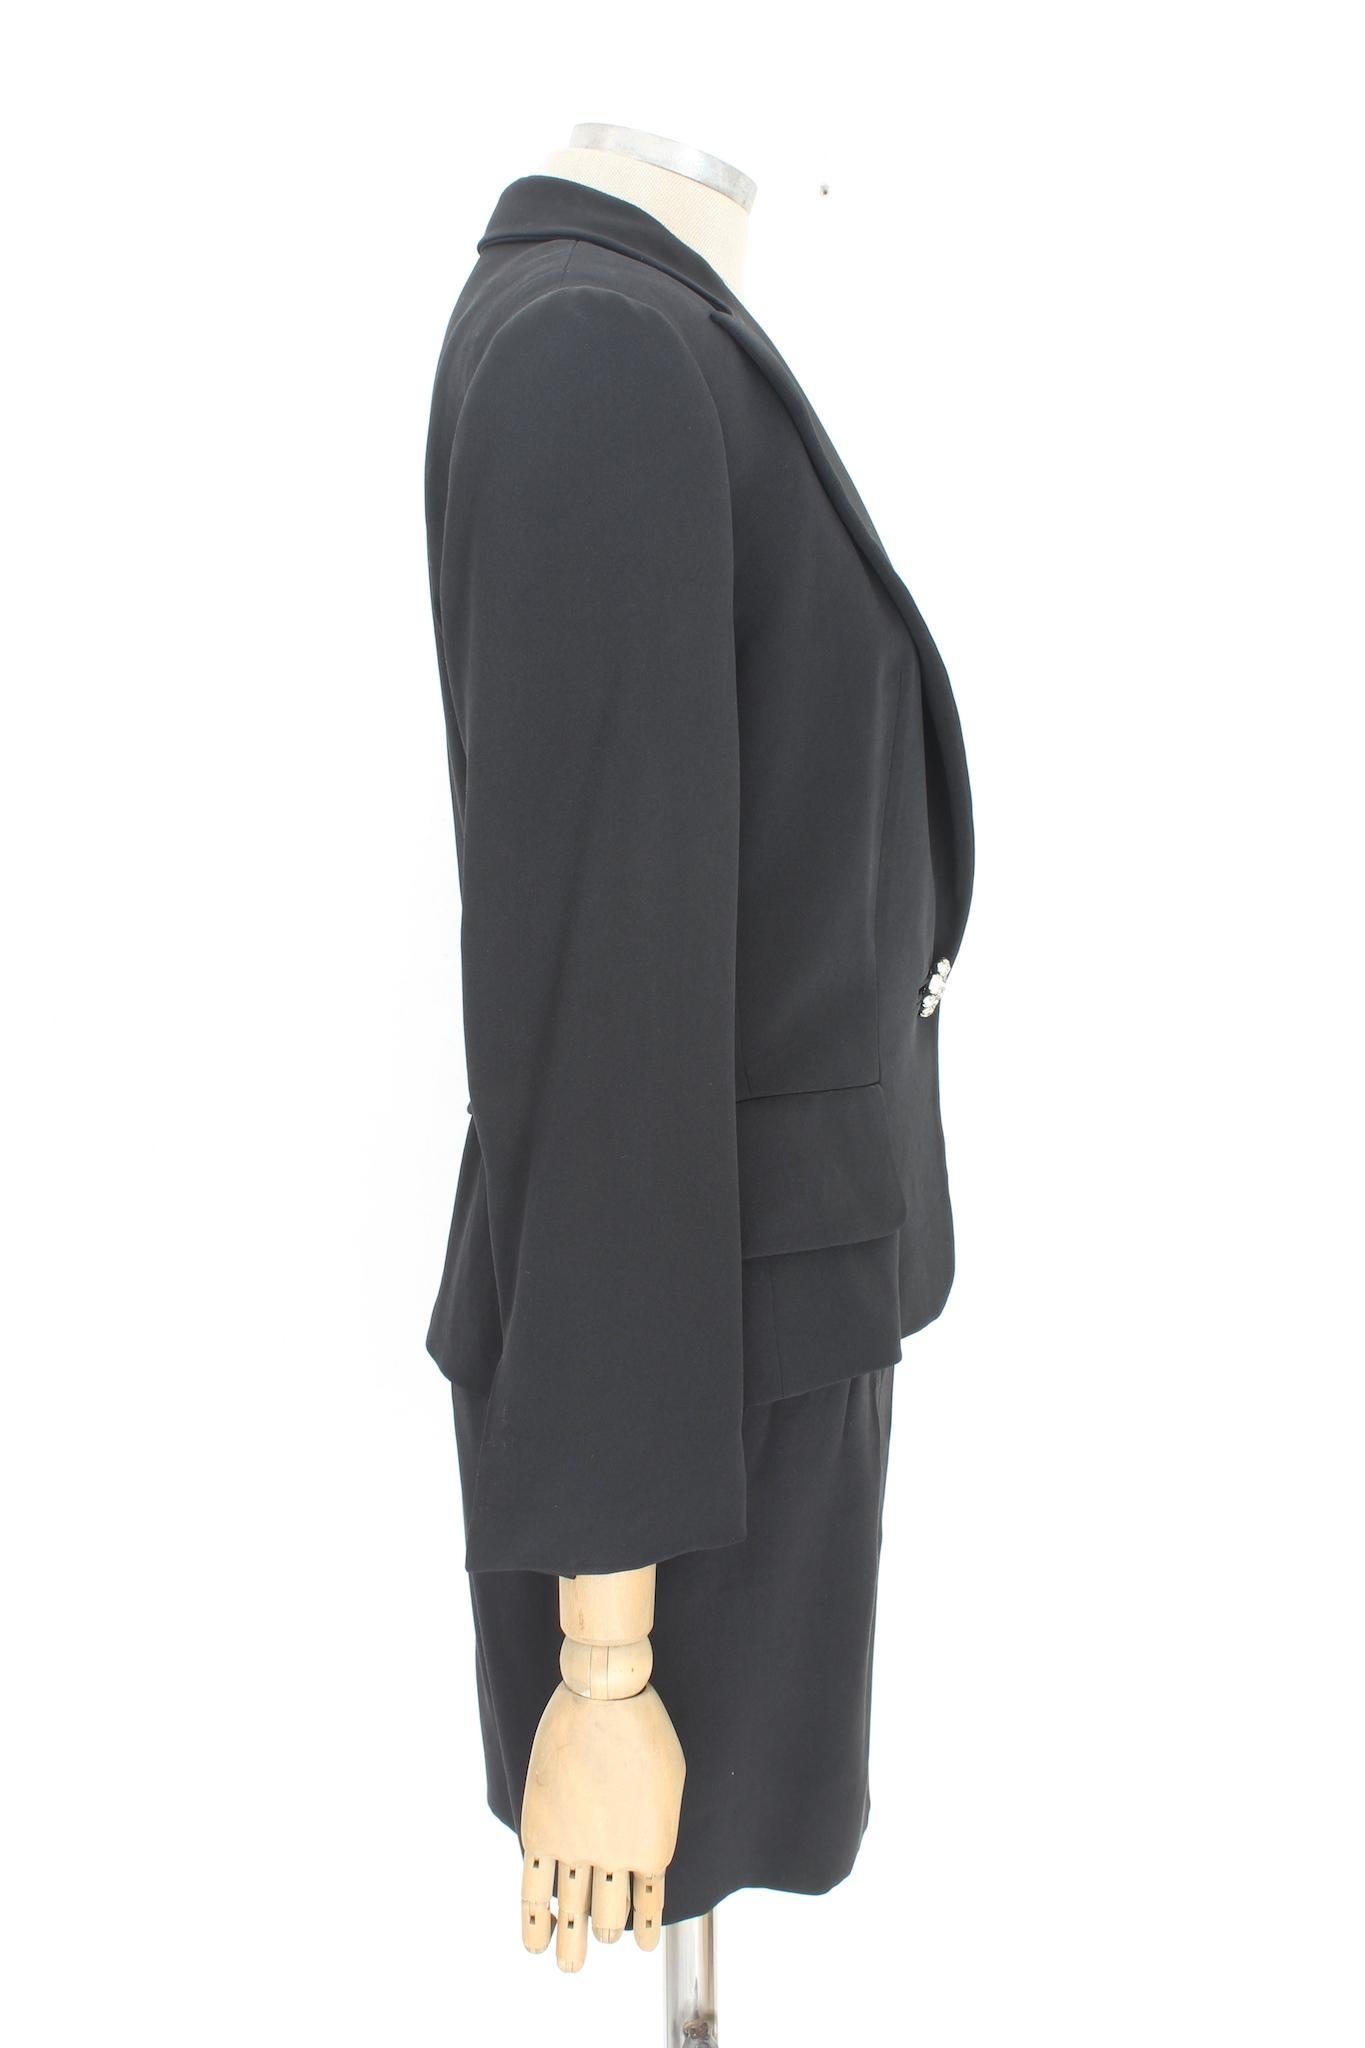 Max Mara Black Silk Vintage Skirt Suit 90s In Excellent Condition For Sale In Brindisi, Bt